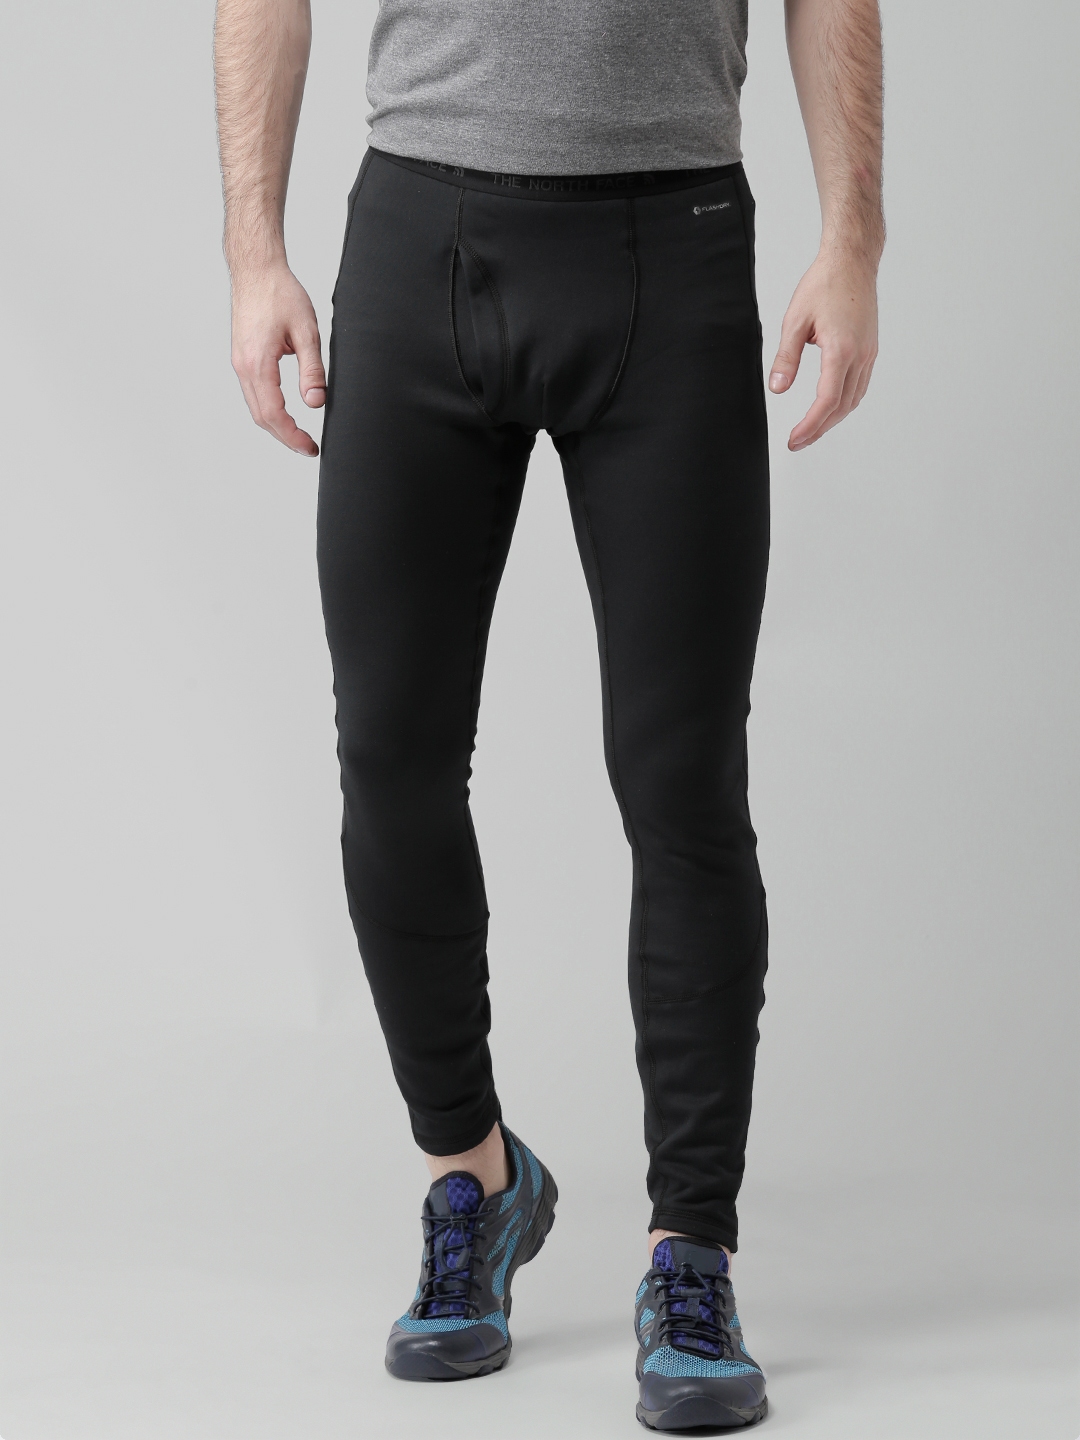 The North Face Black Expedition FlashDry Baselayer Tights